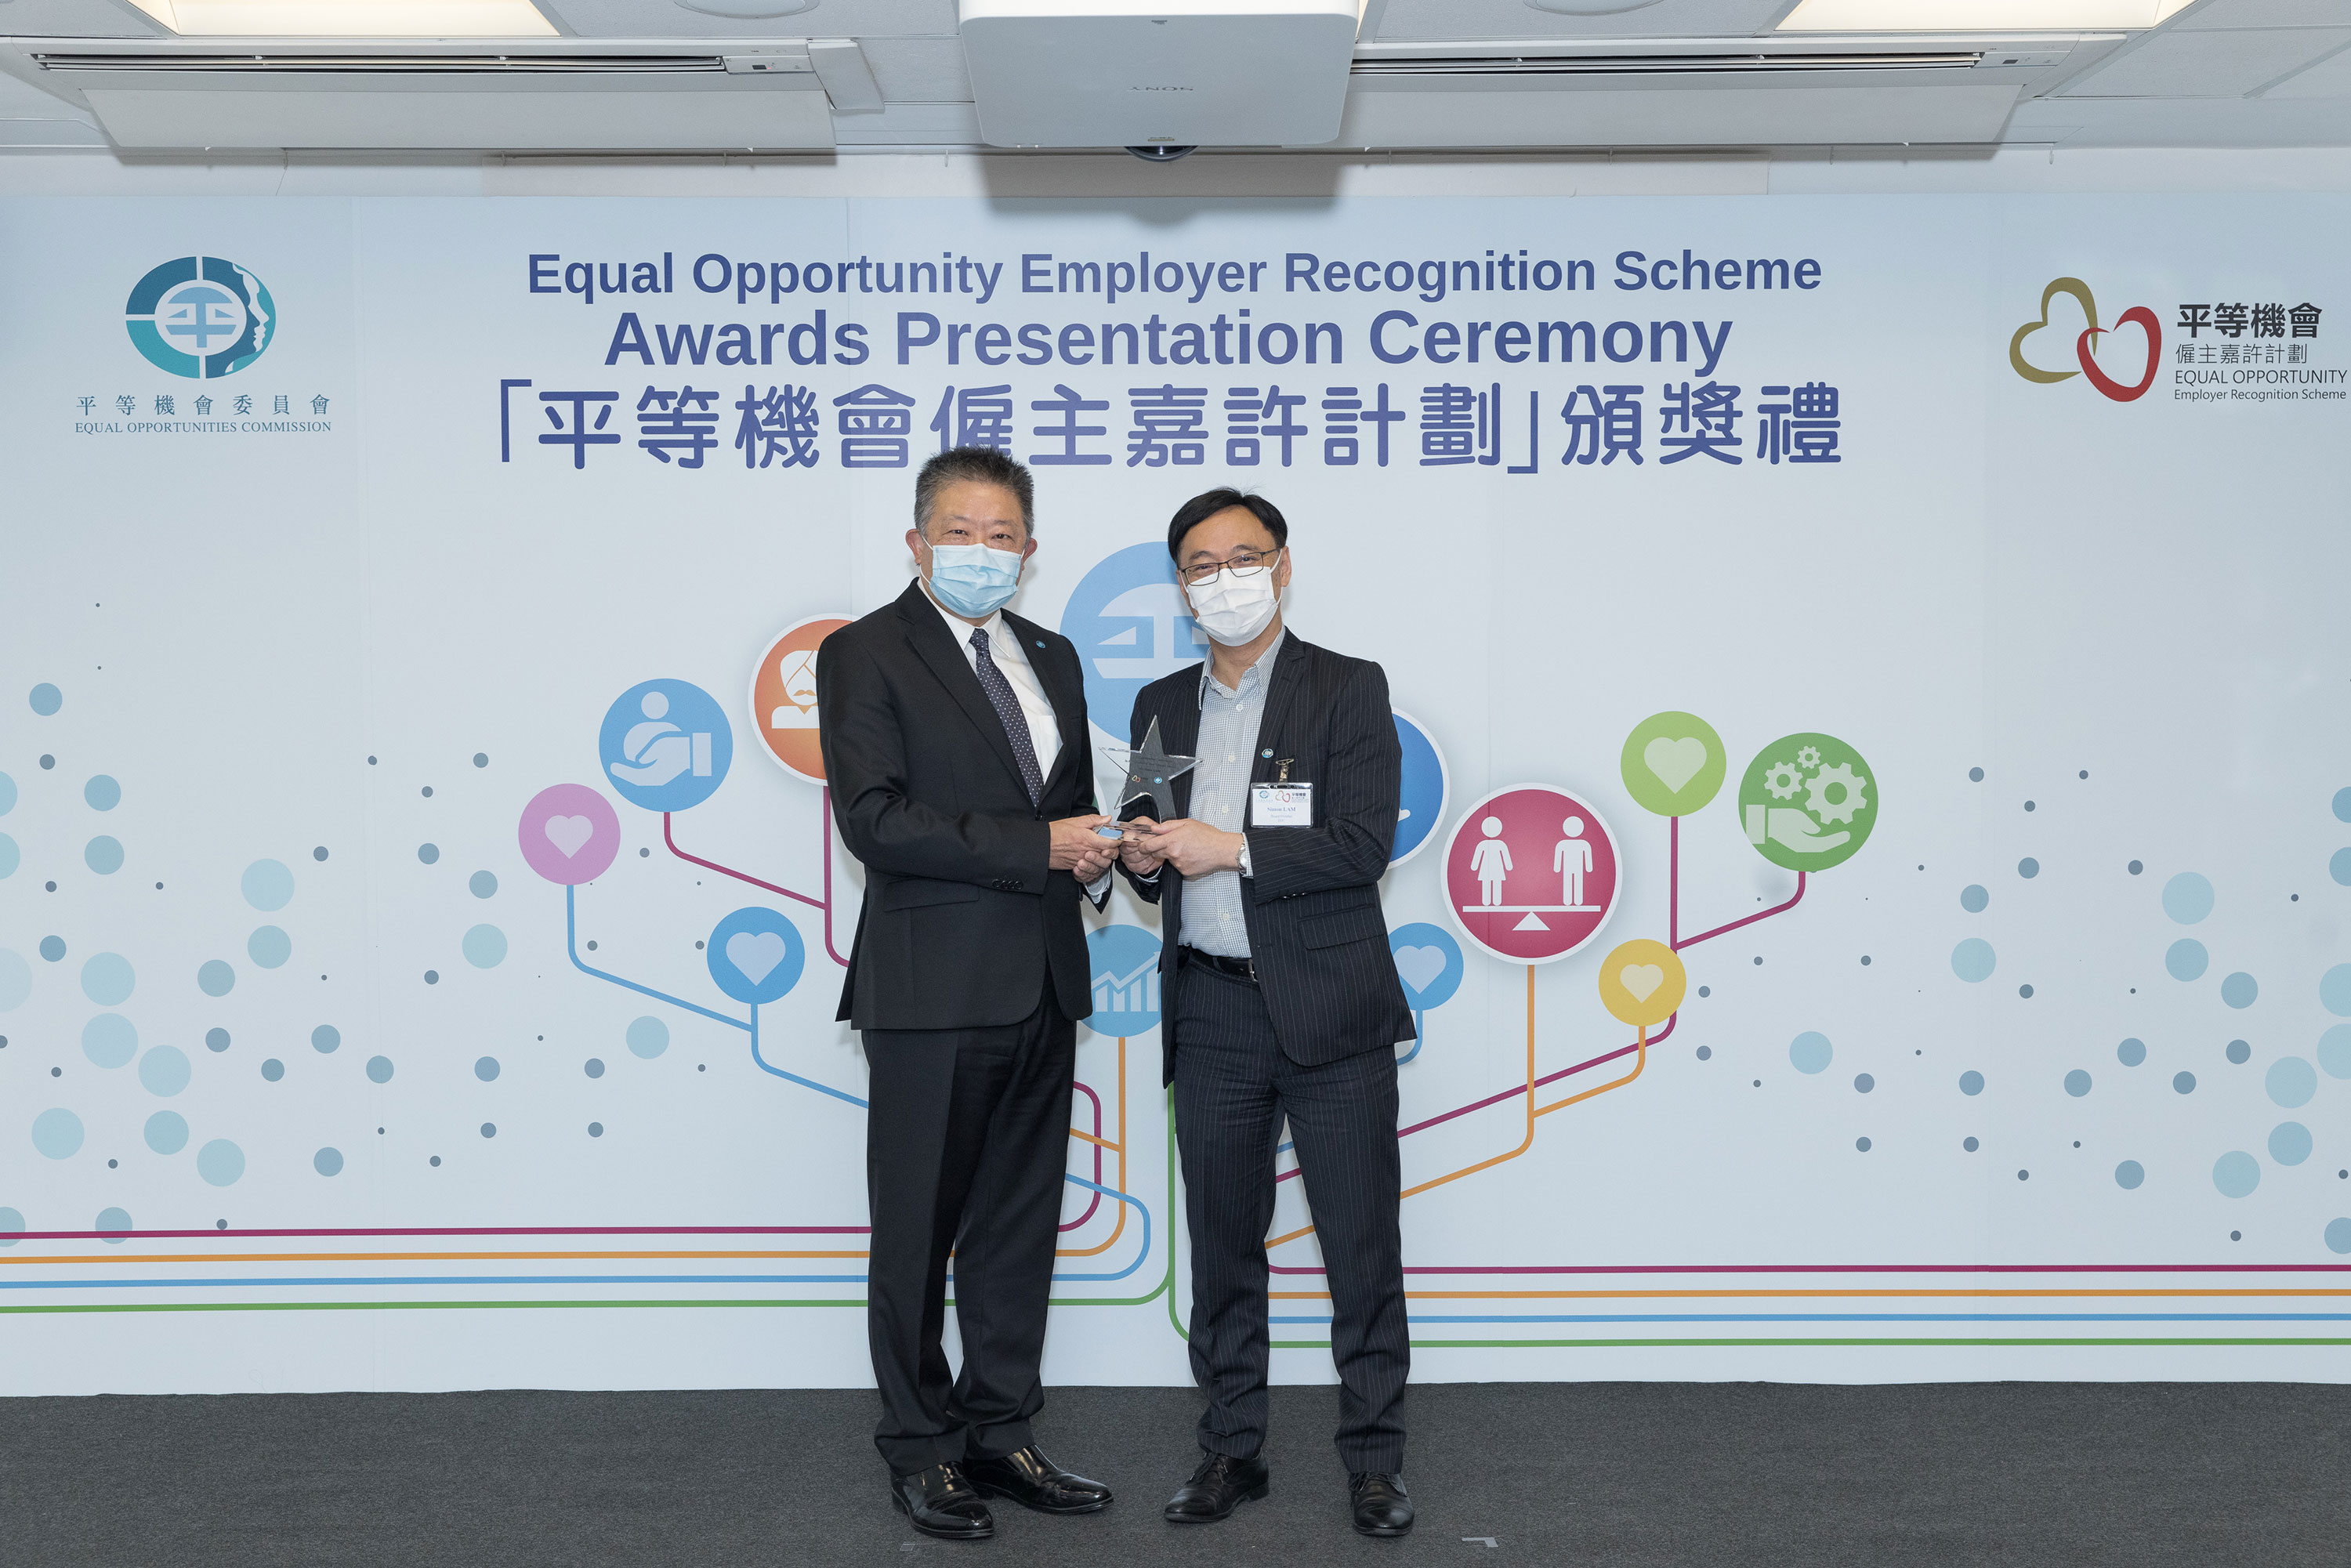 Mr Ricky CHU Man-kin, IDS, Chairperson of the Equal Opportunities Commission (left) presents souvenir to EOC Member Mr Simon LAM (right), who served as member of the assessment panel of the Equal Opportunity Employer Recognition Scheme. 